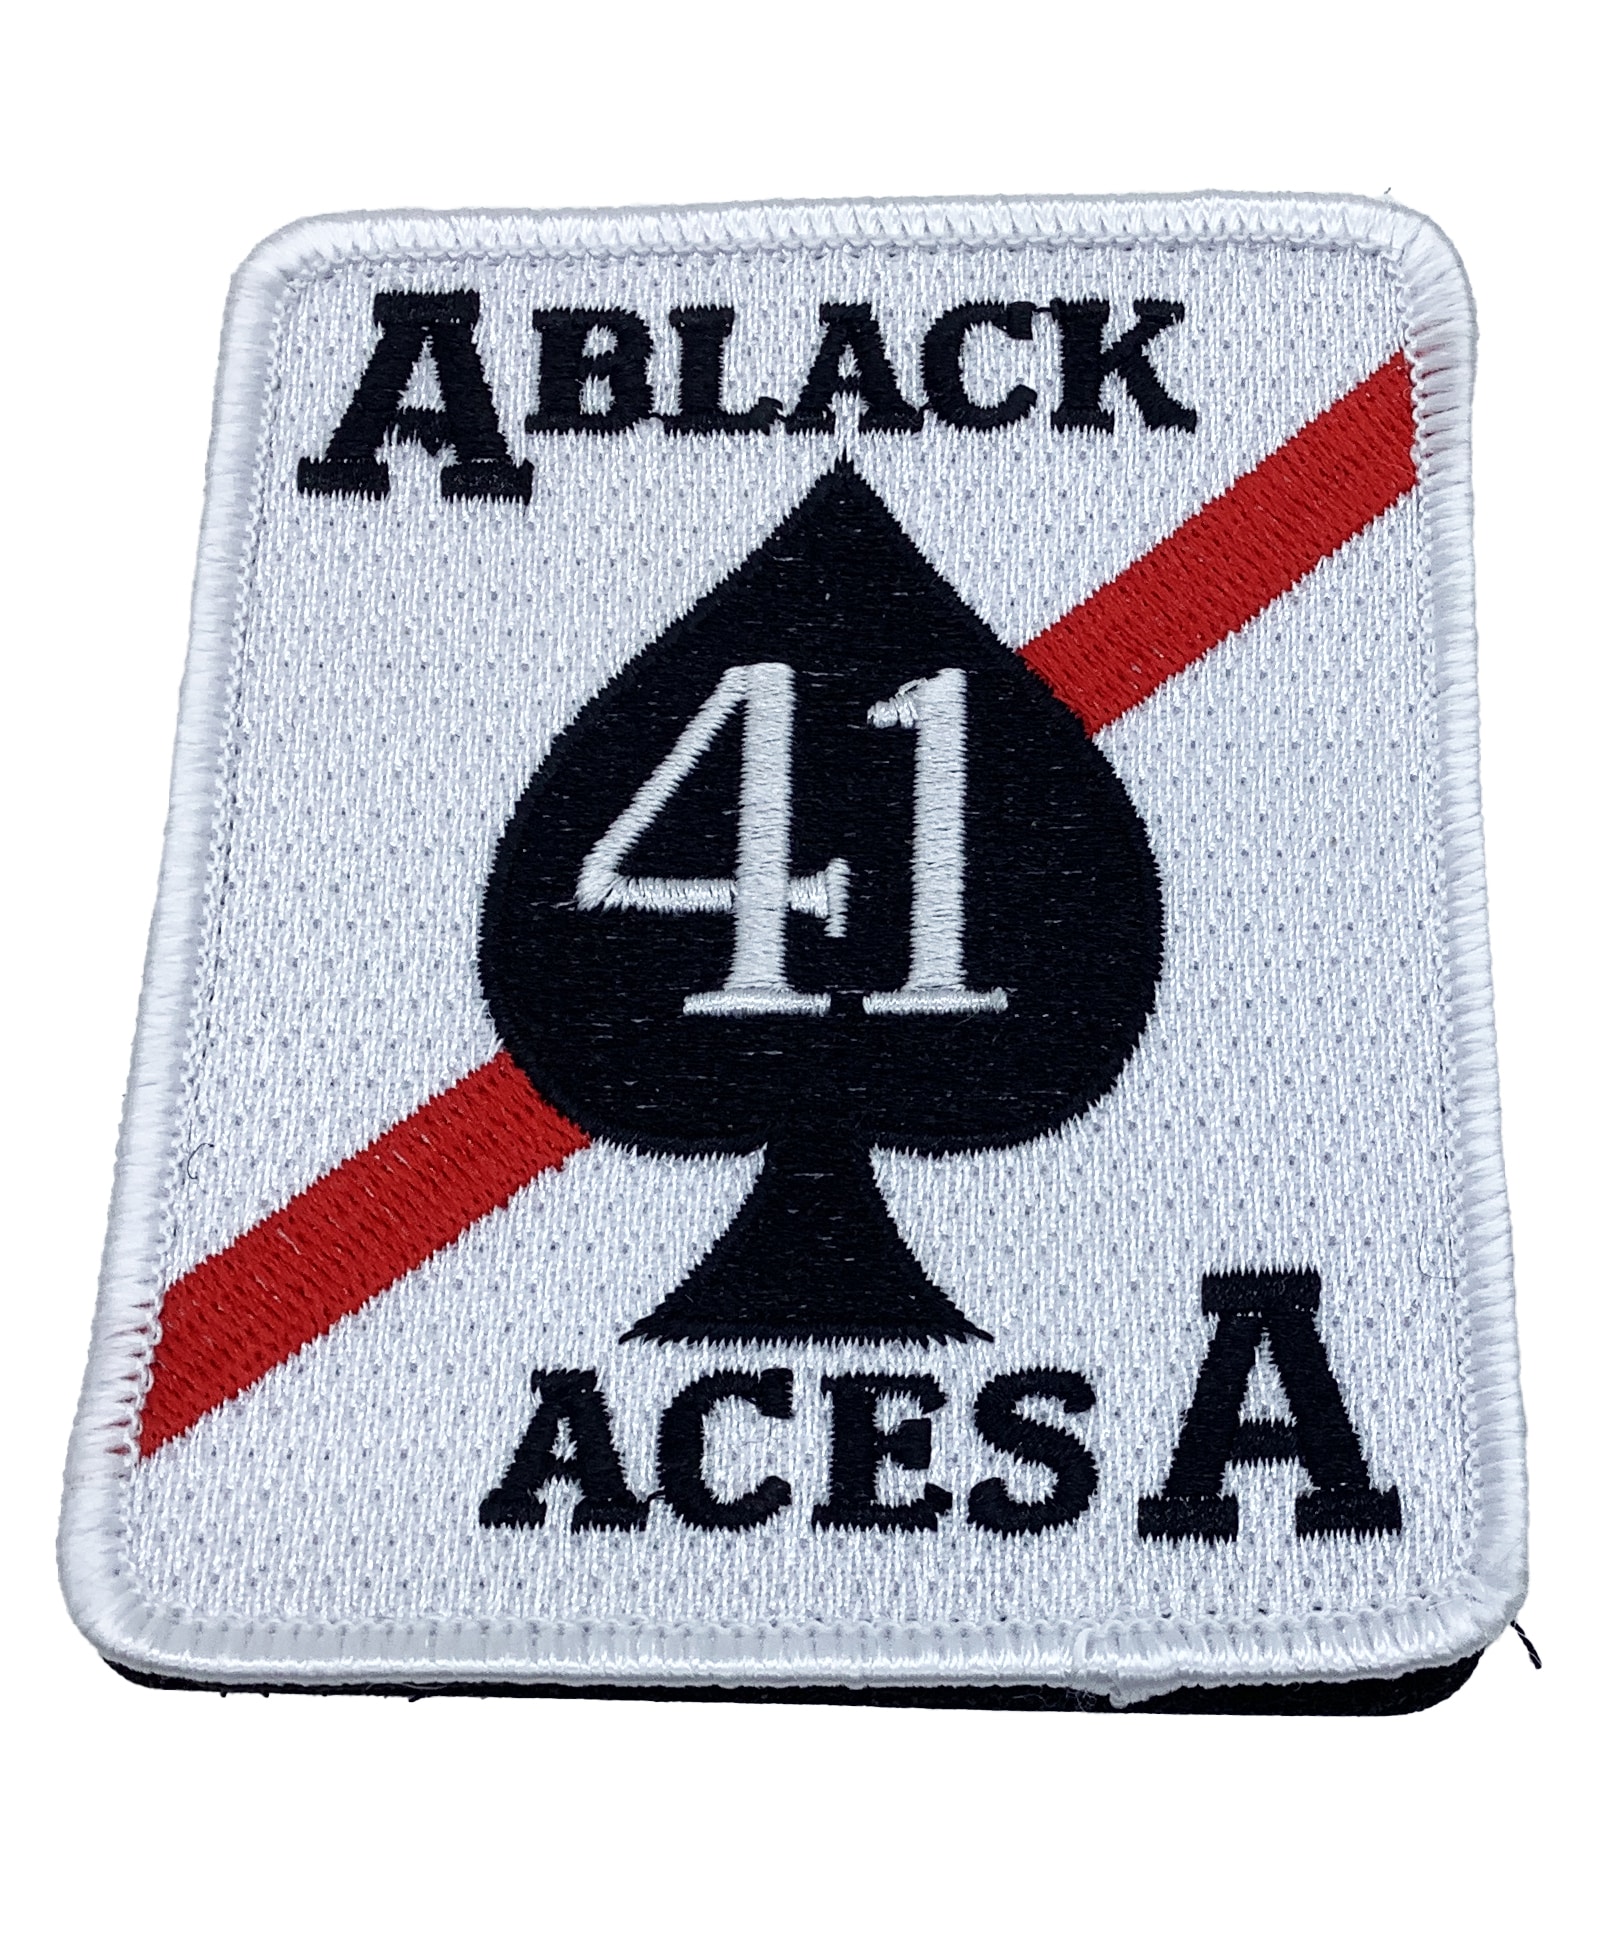 VF-41 / VFA-41 Black Aces Squadron Patch - With Hook and Loop